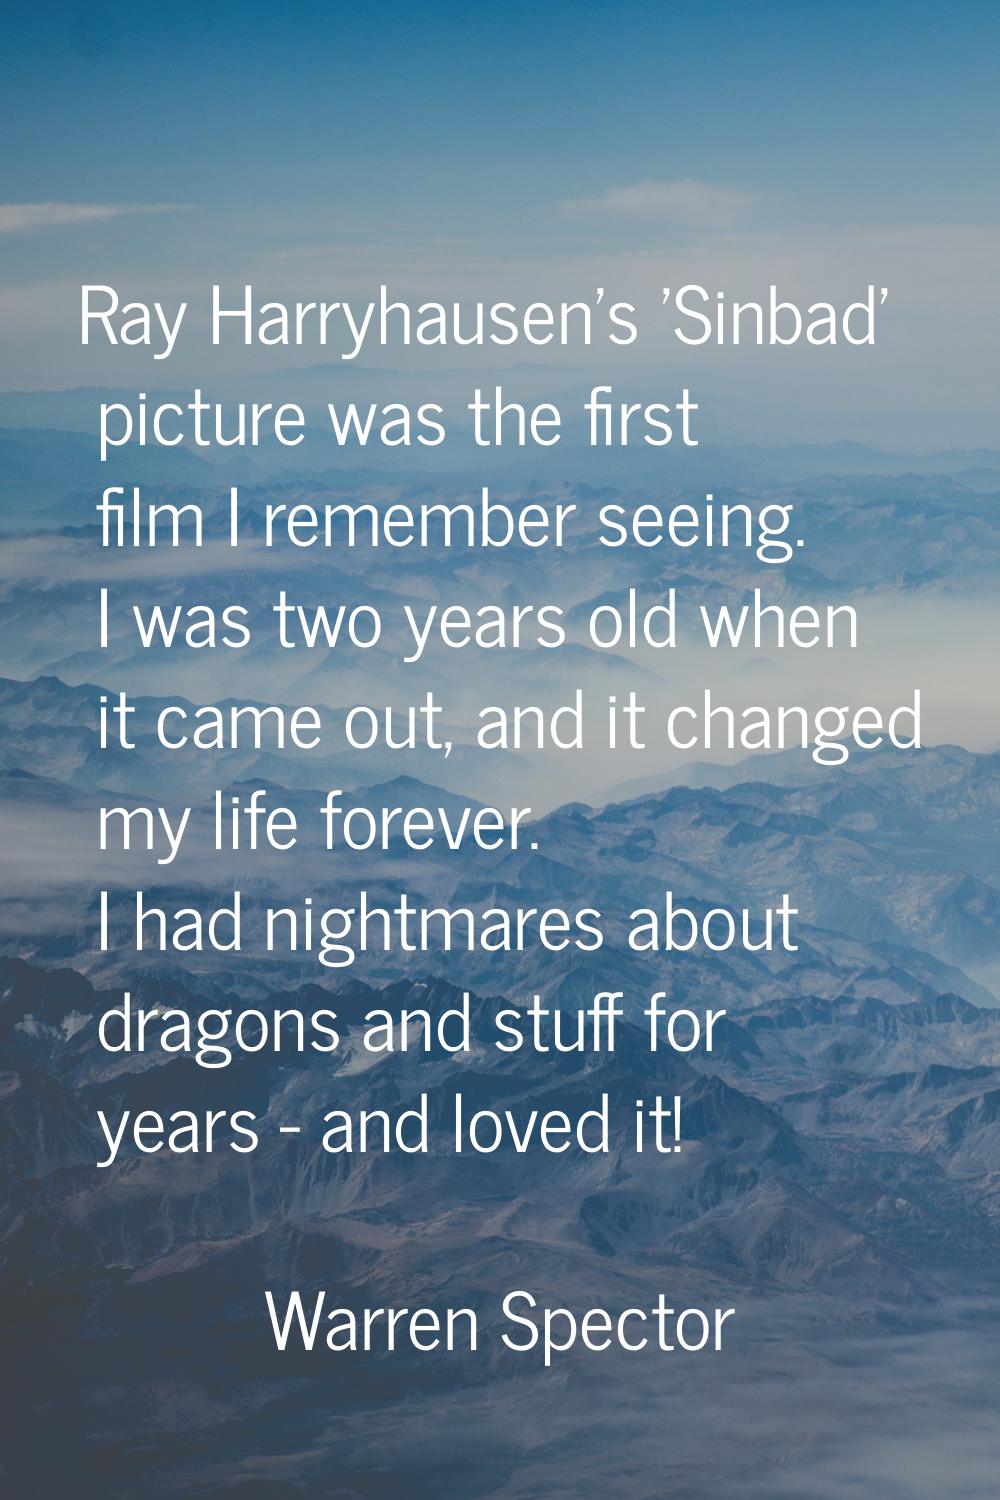 Ray Harryhausen's 'Sinbad' picture was the first film I remember seeing. I was two years old when i